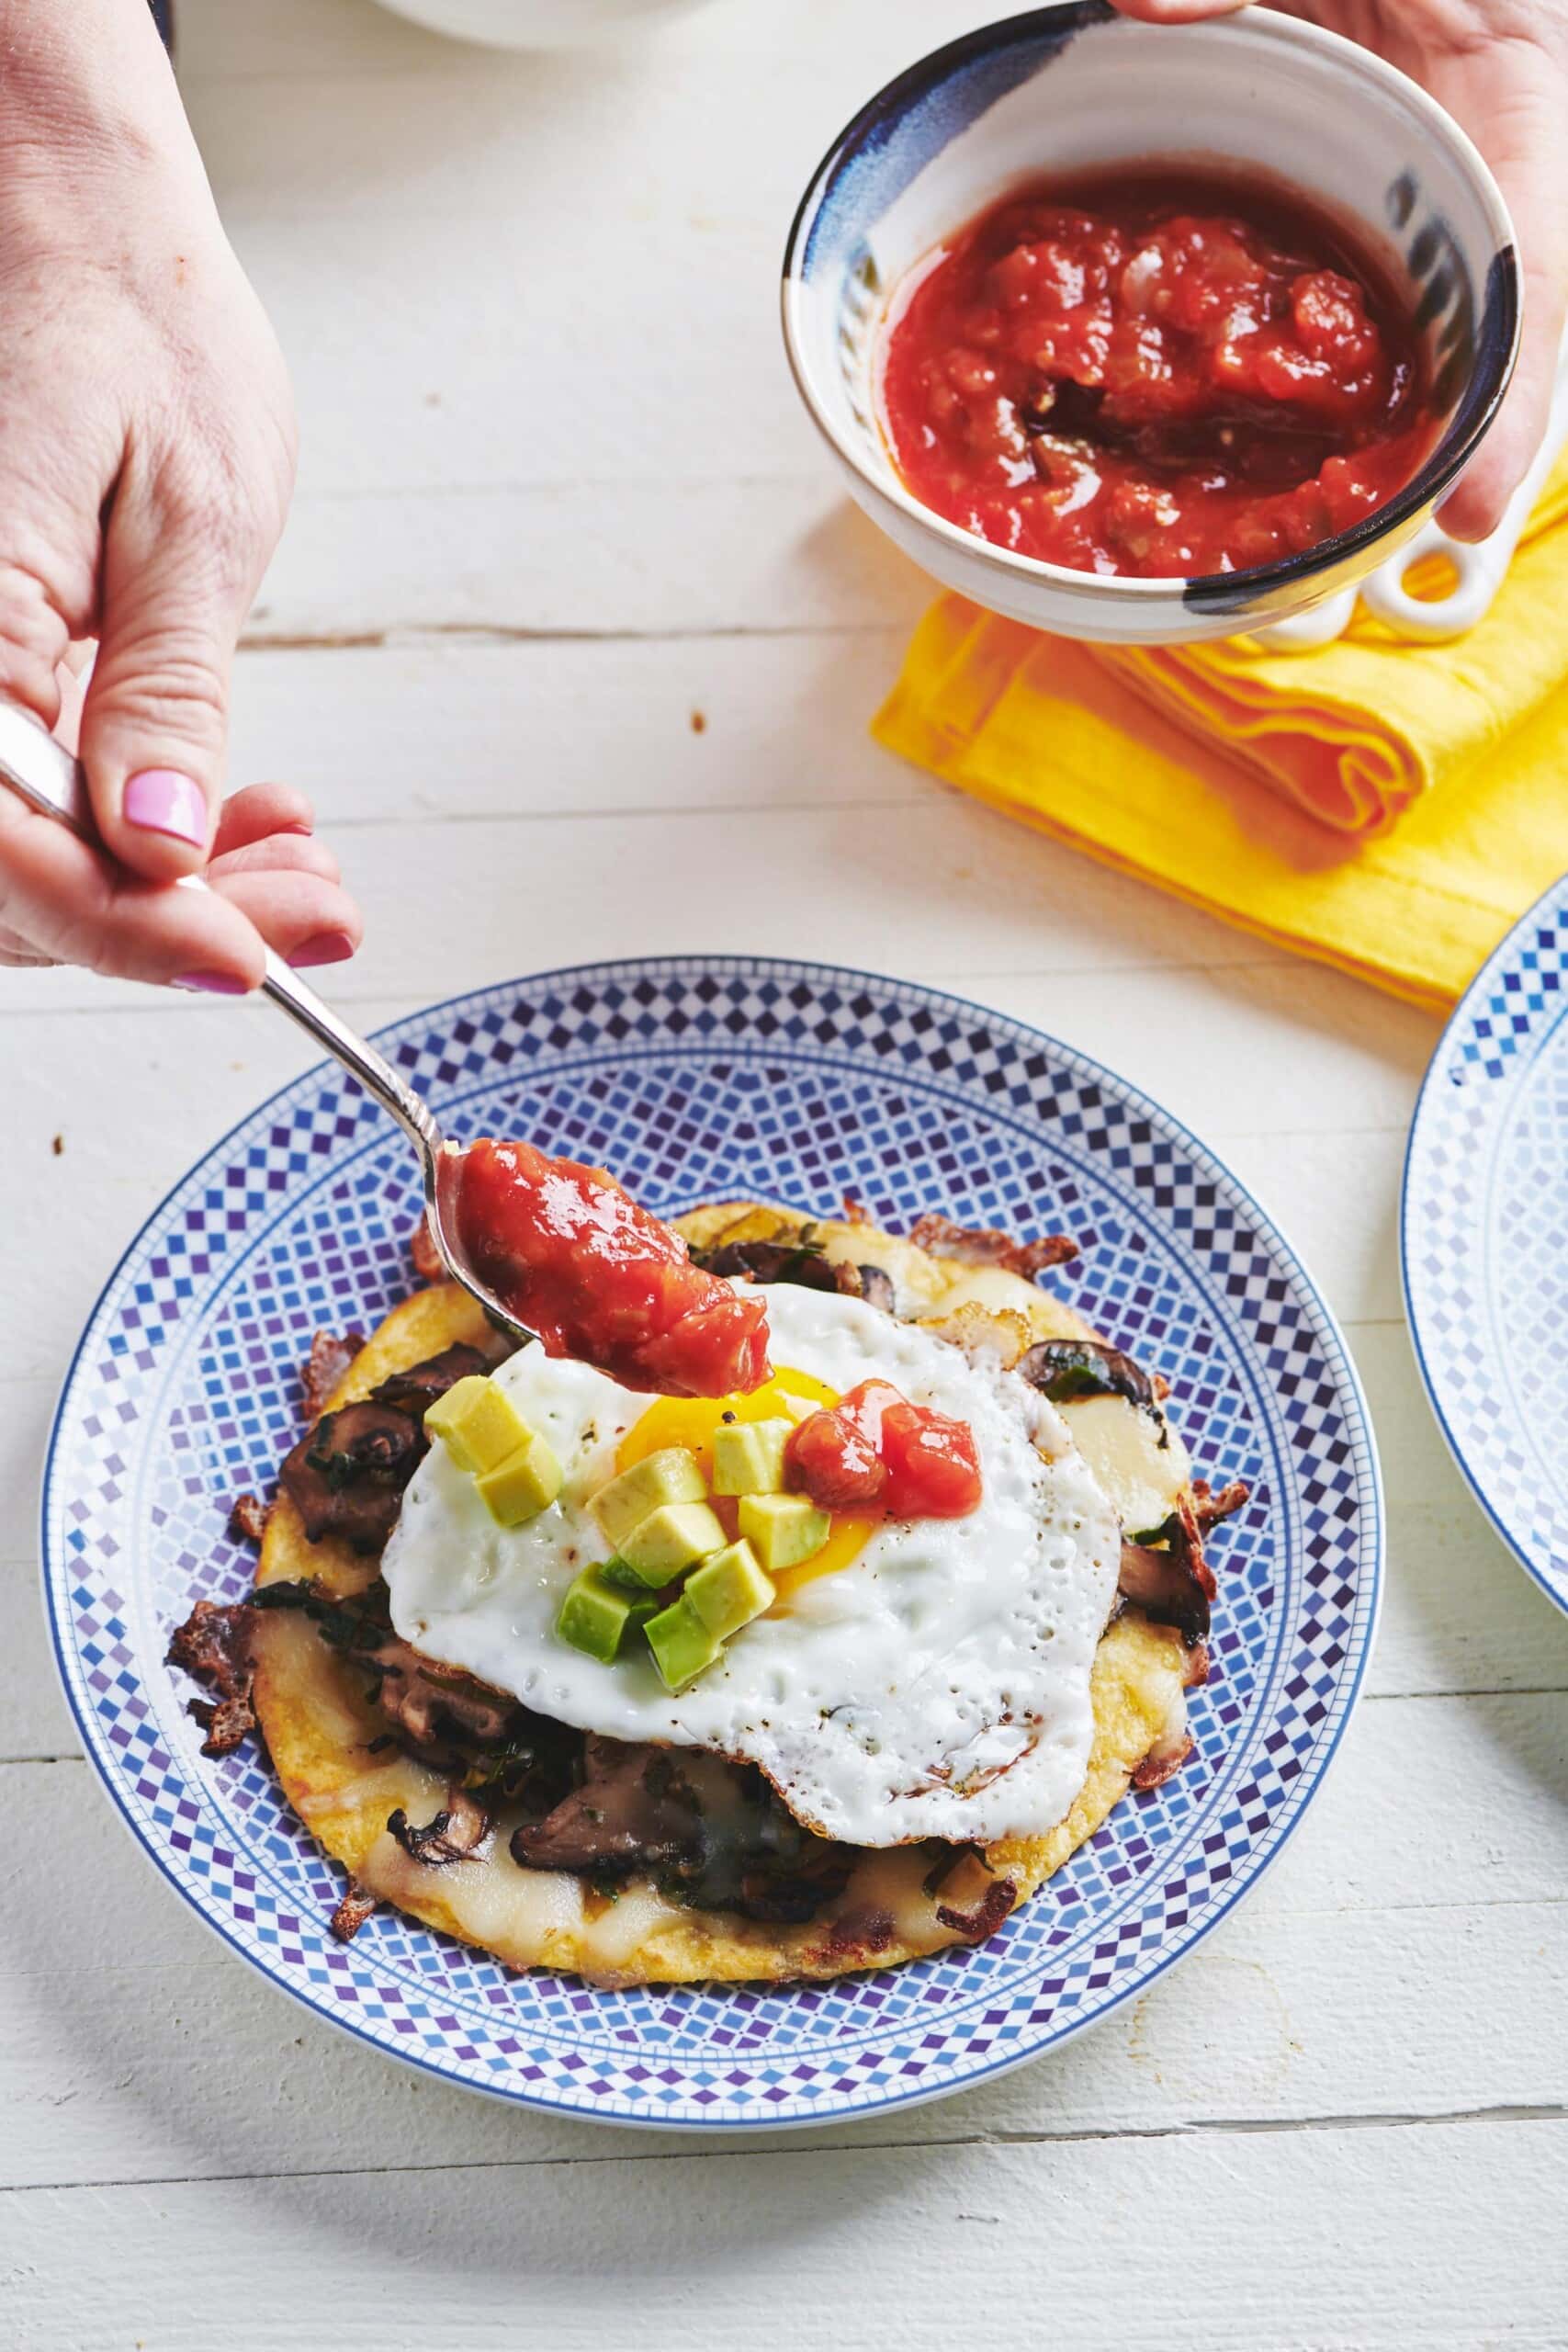 Woman using a spoon to add salsa to a Fried Egg, Mushroom, Leek, and Cheese Tostada.